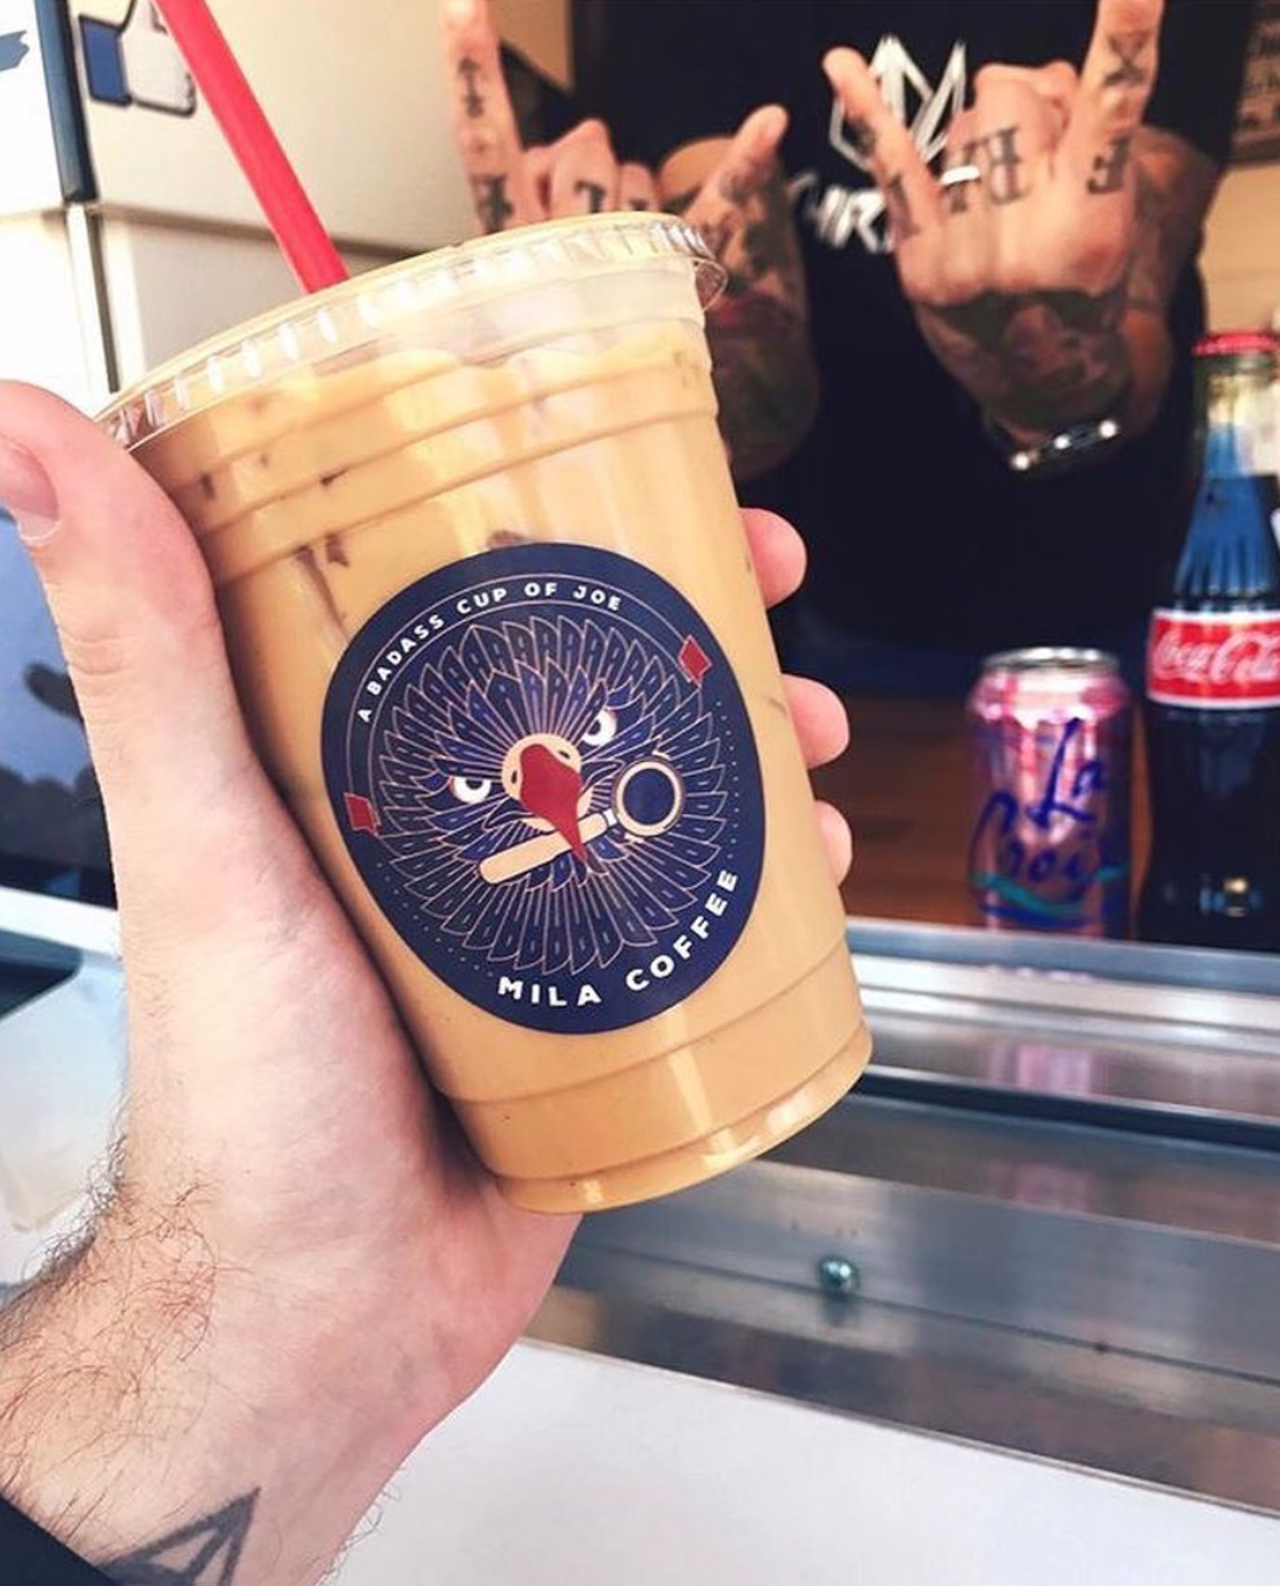 Drink This: Horchata iced coffee
At Mila, Marco Antonio Lastra services the Midtown area and the cycling crowd with Tweed Coffee out of Dallas. Try a splash of horchata made using Mexican vanilla.
Photo via Instagram / milacoffeesa